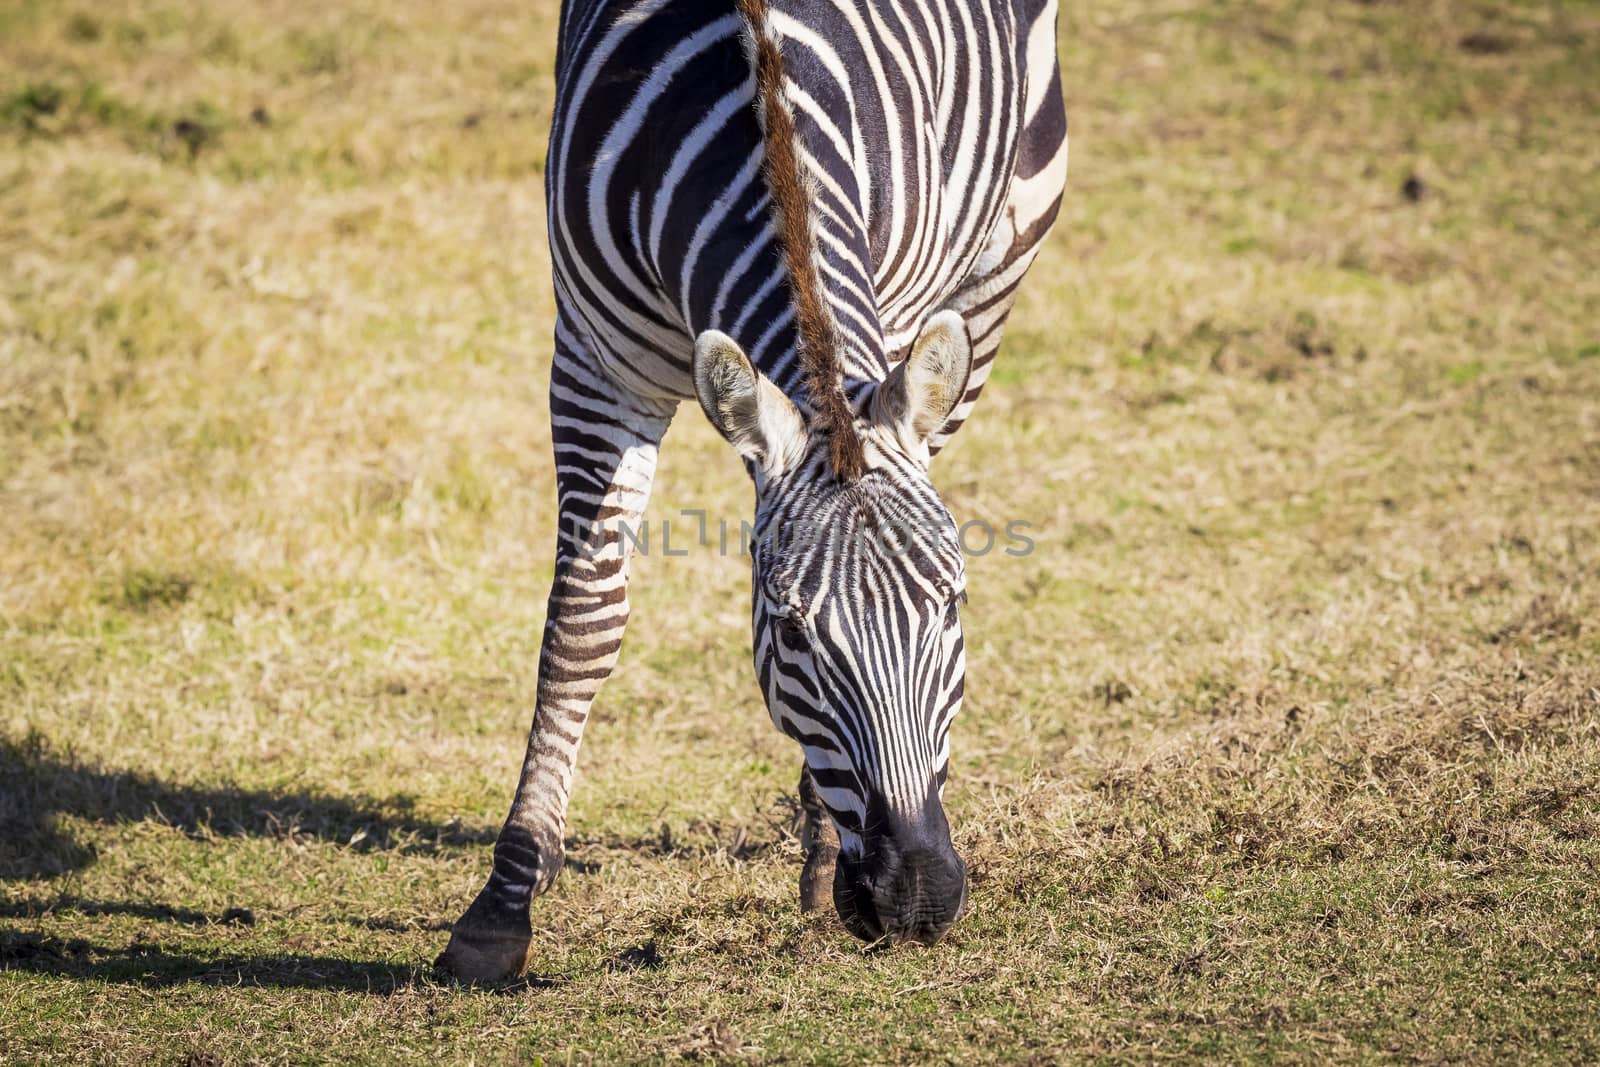 A black and white Zebra eating green grass in an open field by WittkePhotos